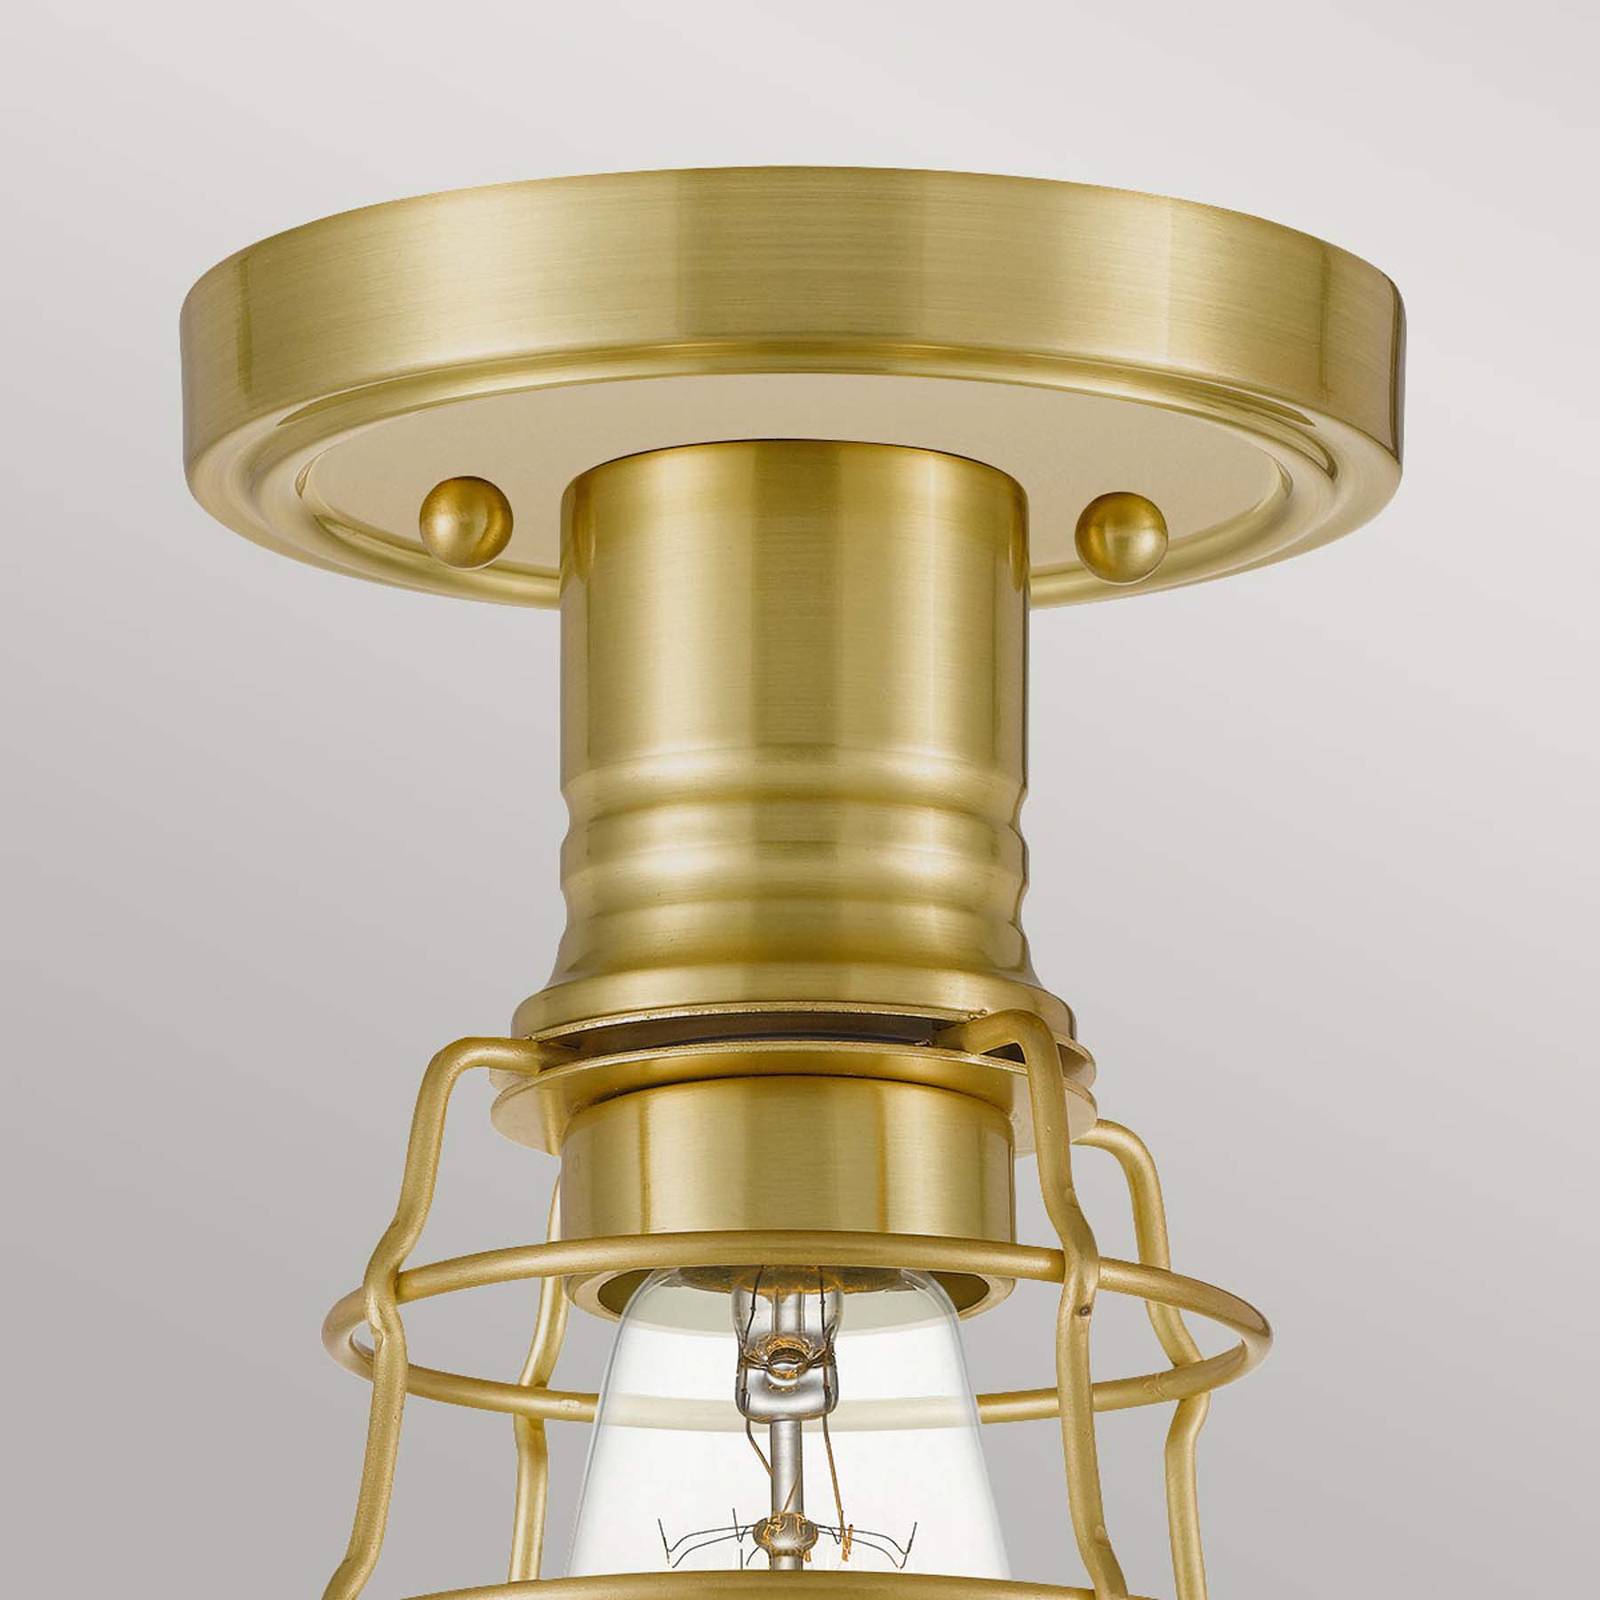 Photos - Chandelier / Lamp Quoizel Mite ceiling light with metal cage, brushed brass 